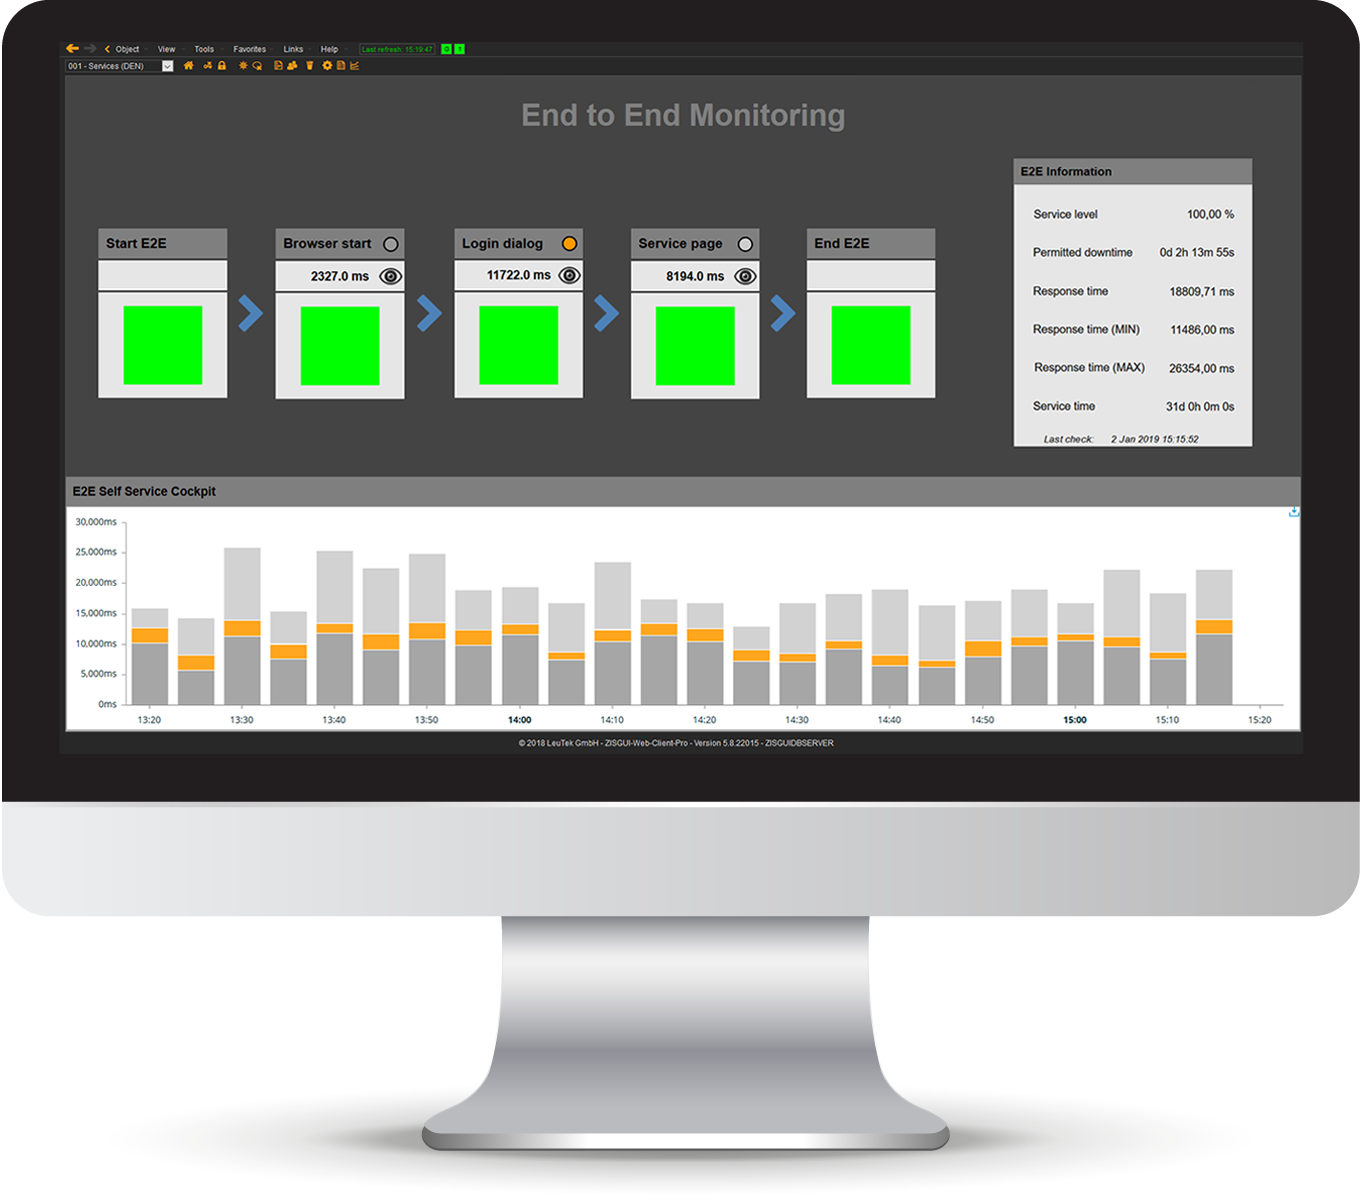 End-to-end monitoring dashboard